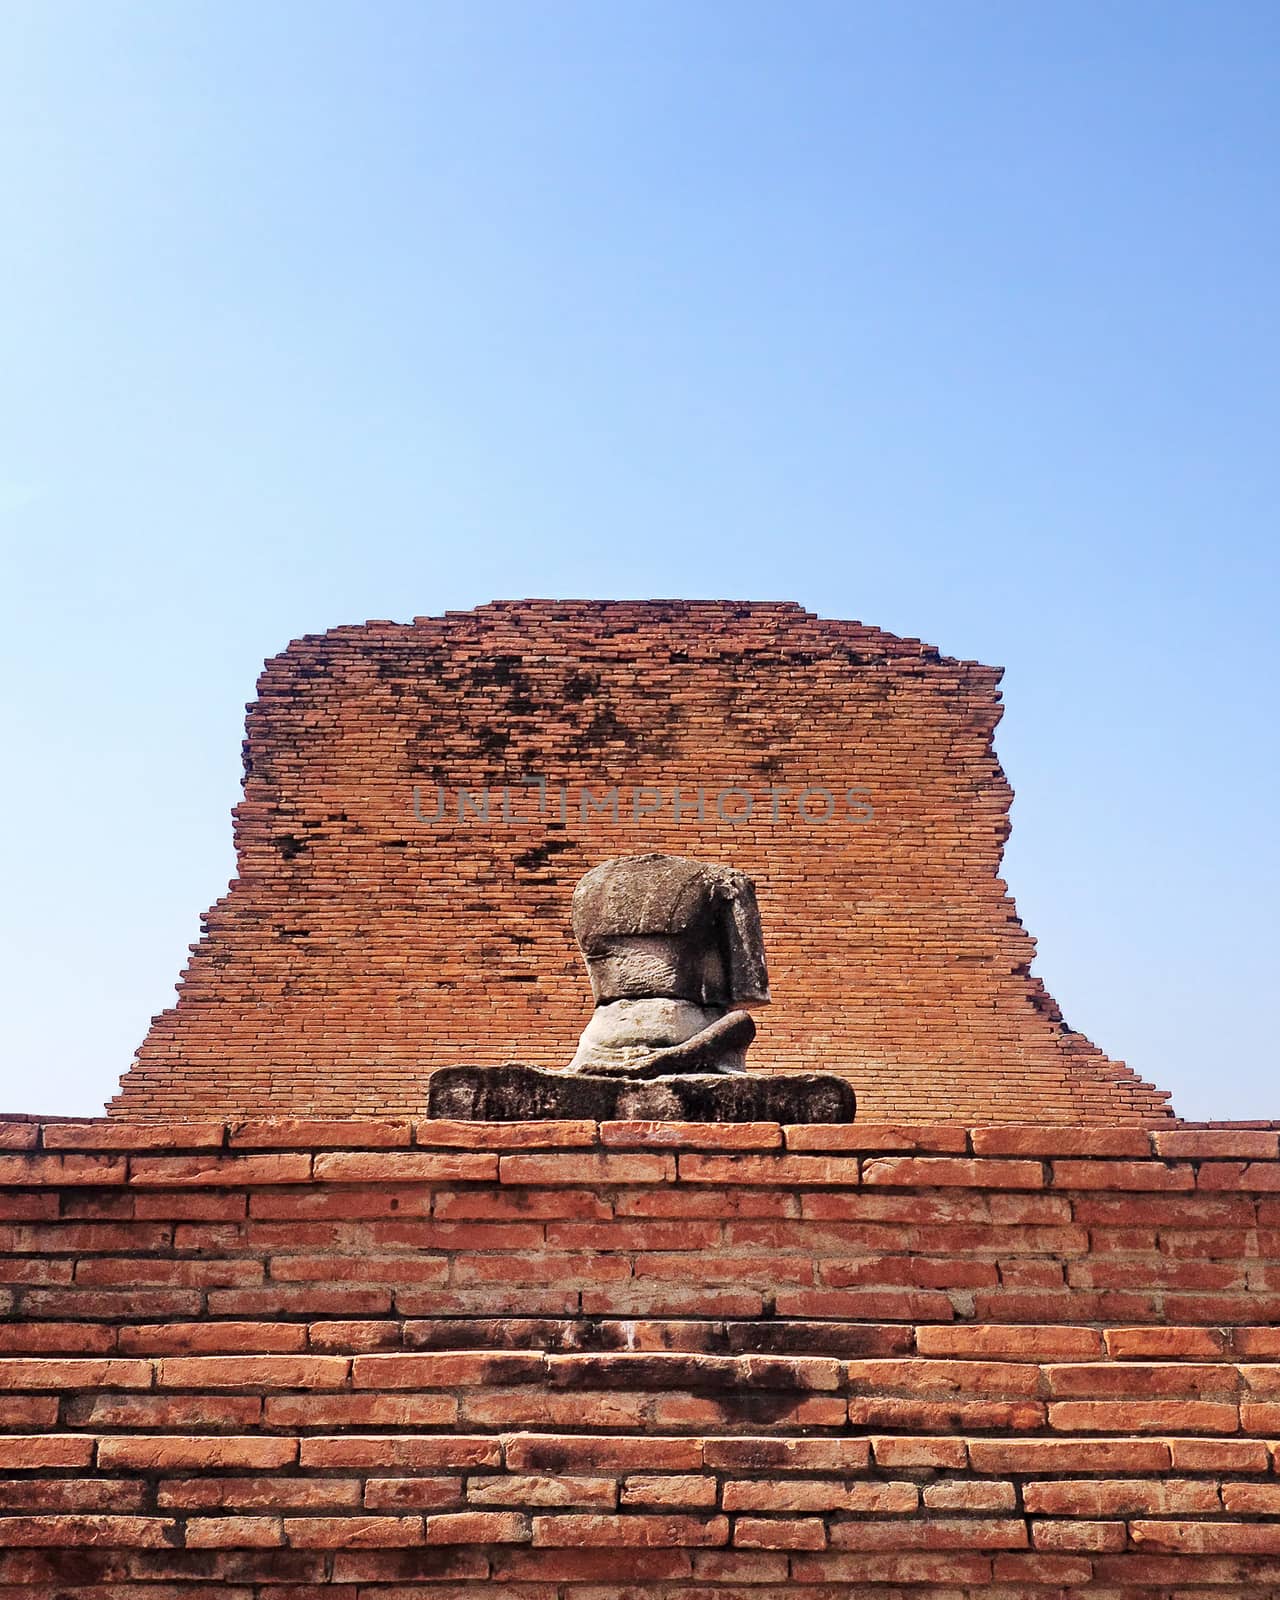 Ruin of Buddha statue in Ayutthaya historical park, Thailand by orsor